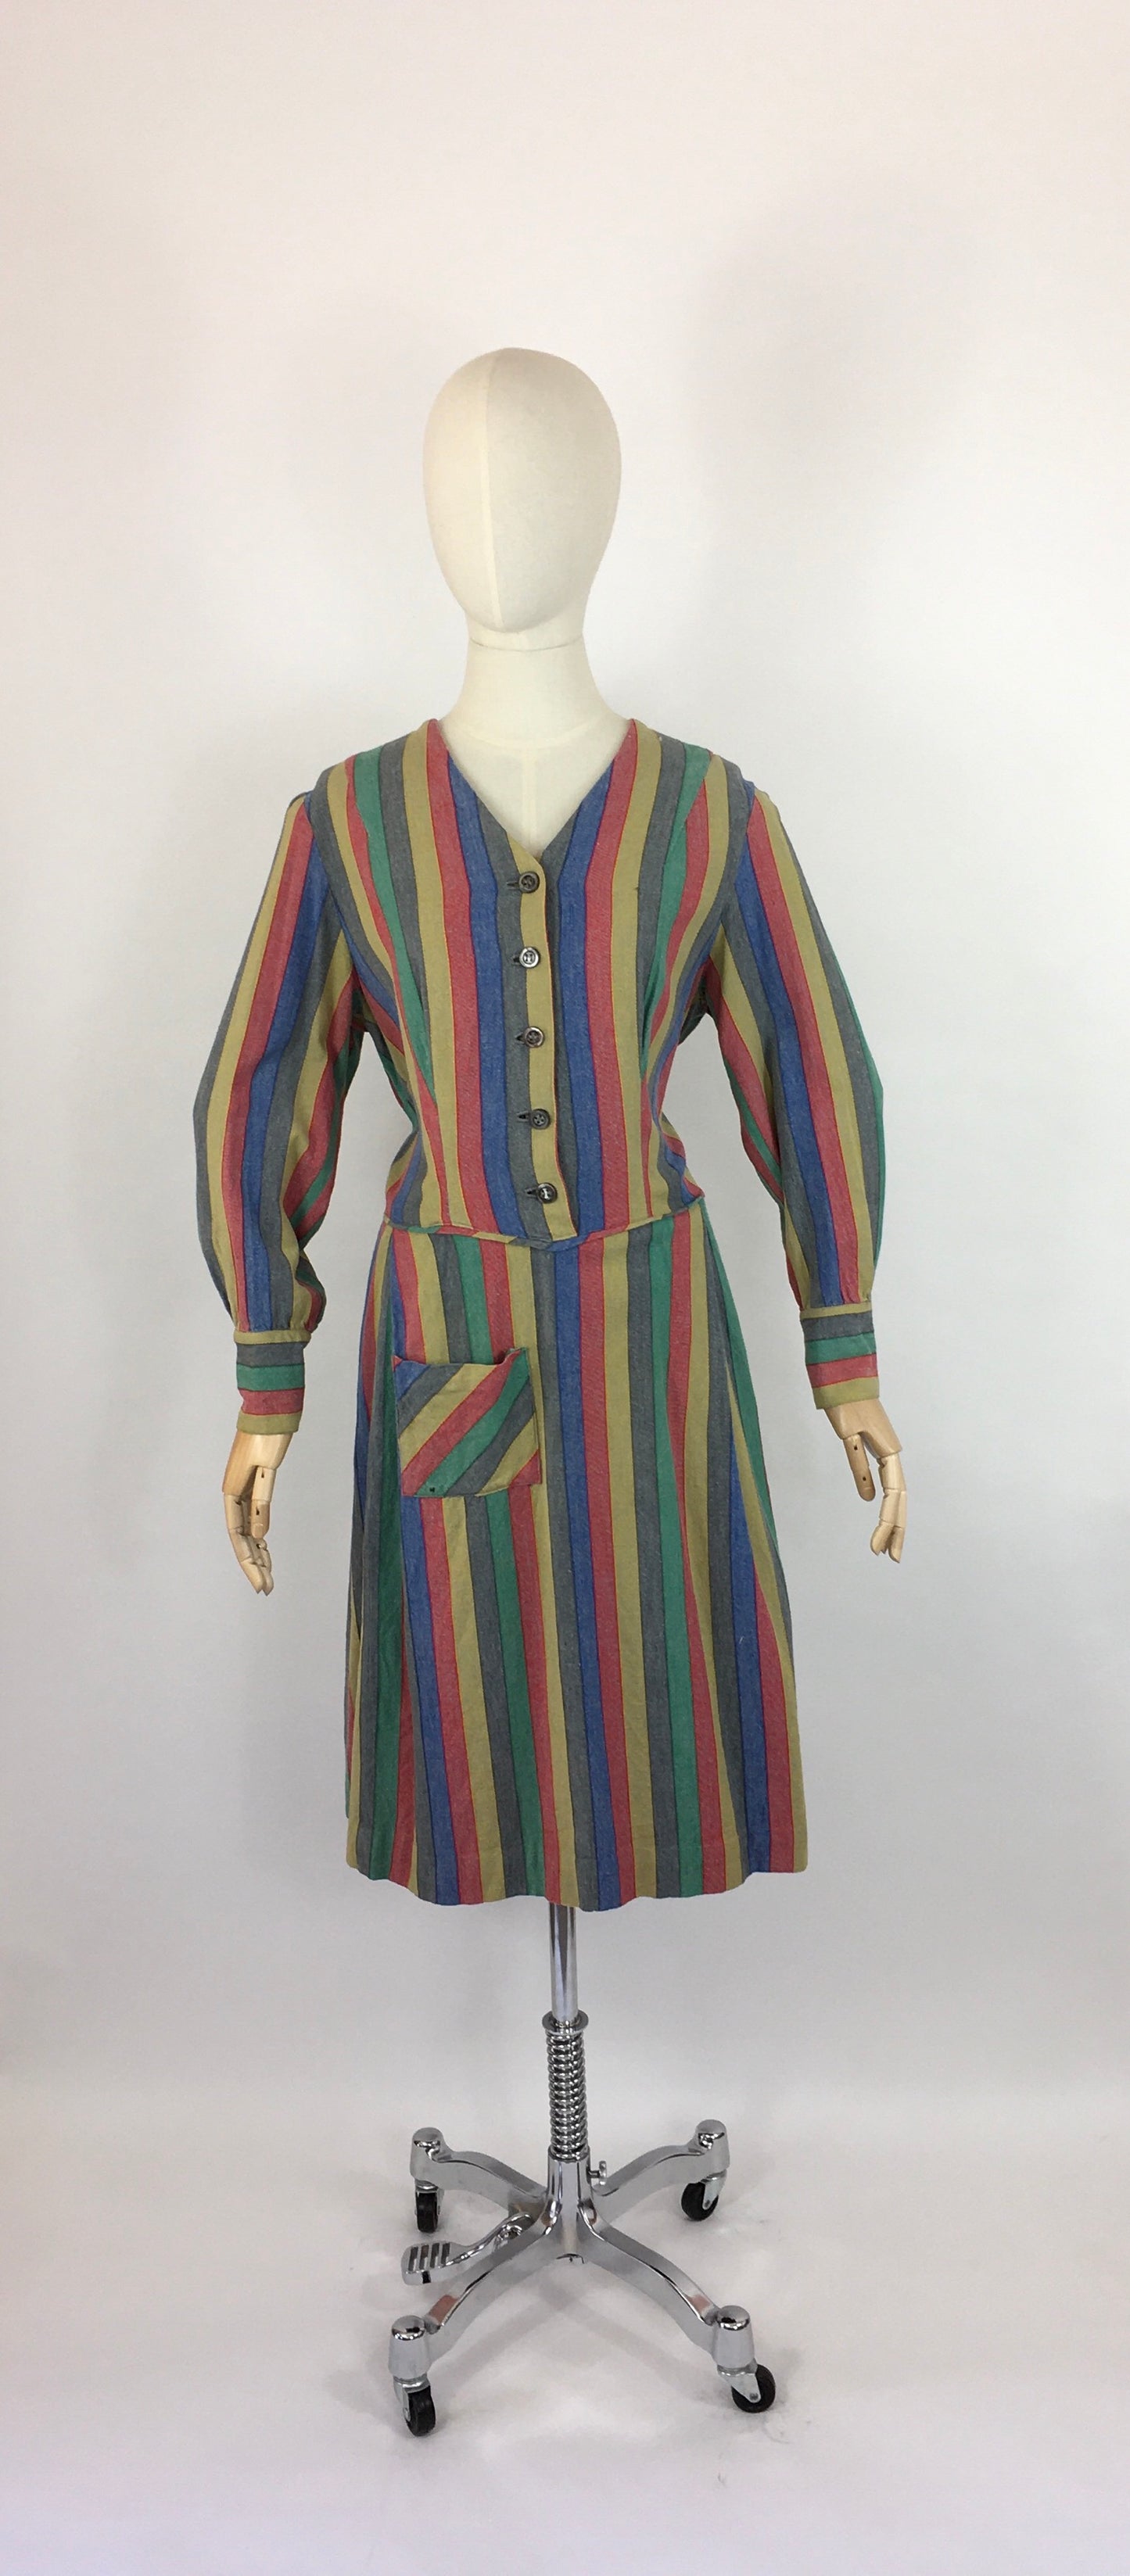 Original Late 1930s Day Dress - In a Fabulous Heavyweight Linen in a Rainbow Stripe with Contrast Chevron Pattern